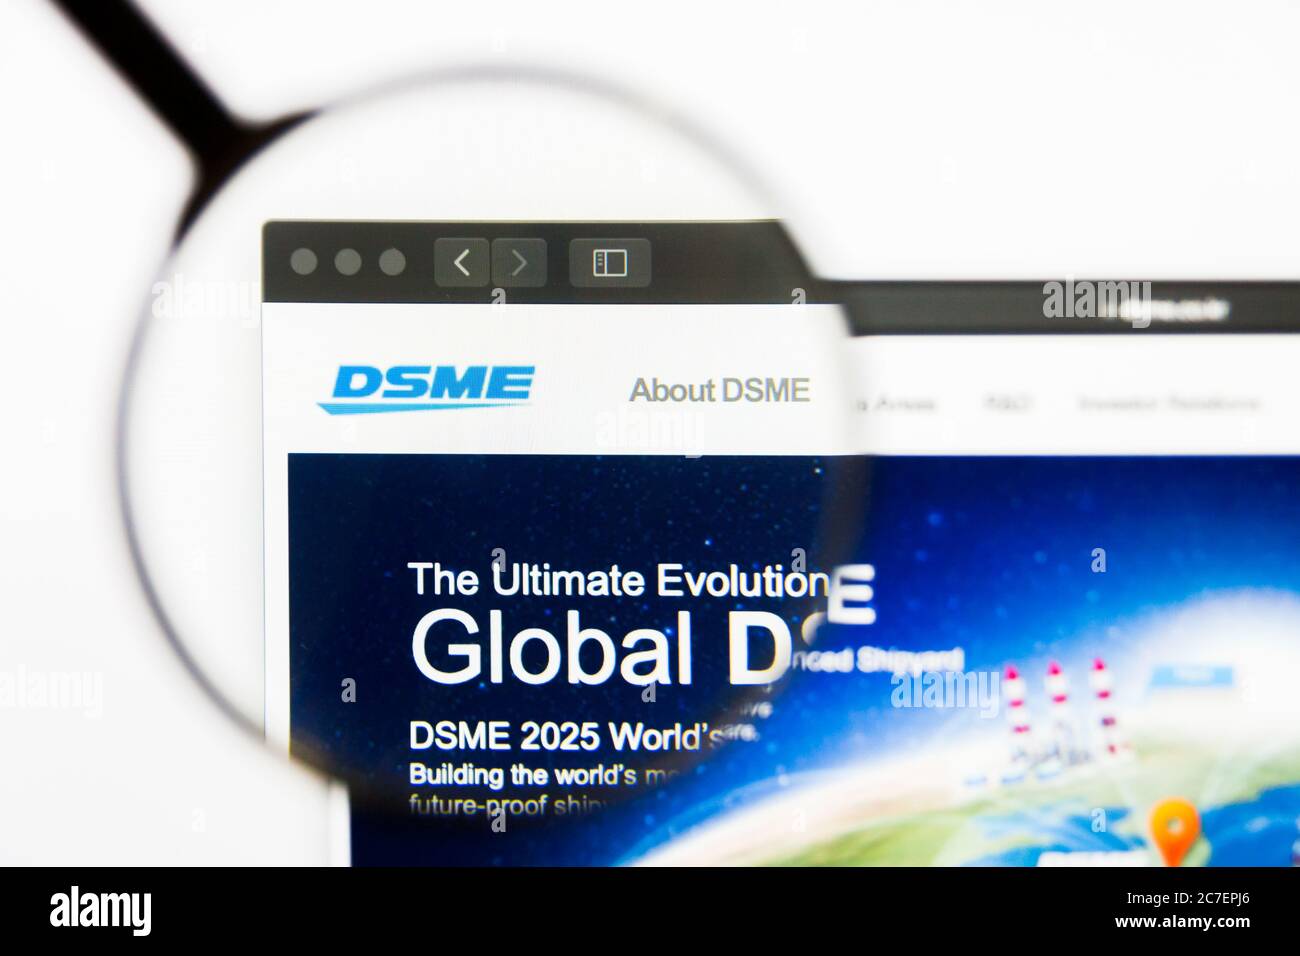 Los Angeles, California, USA - 13 March 2019: Illustrative Editorial, DSME website homepage. DSME logo visible on display screen Stock Photo